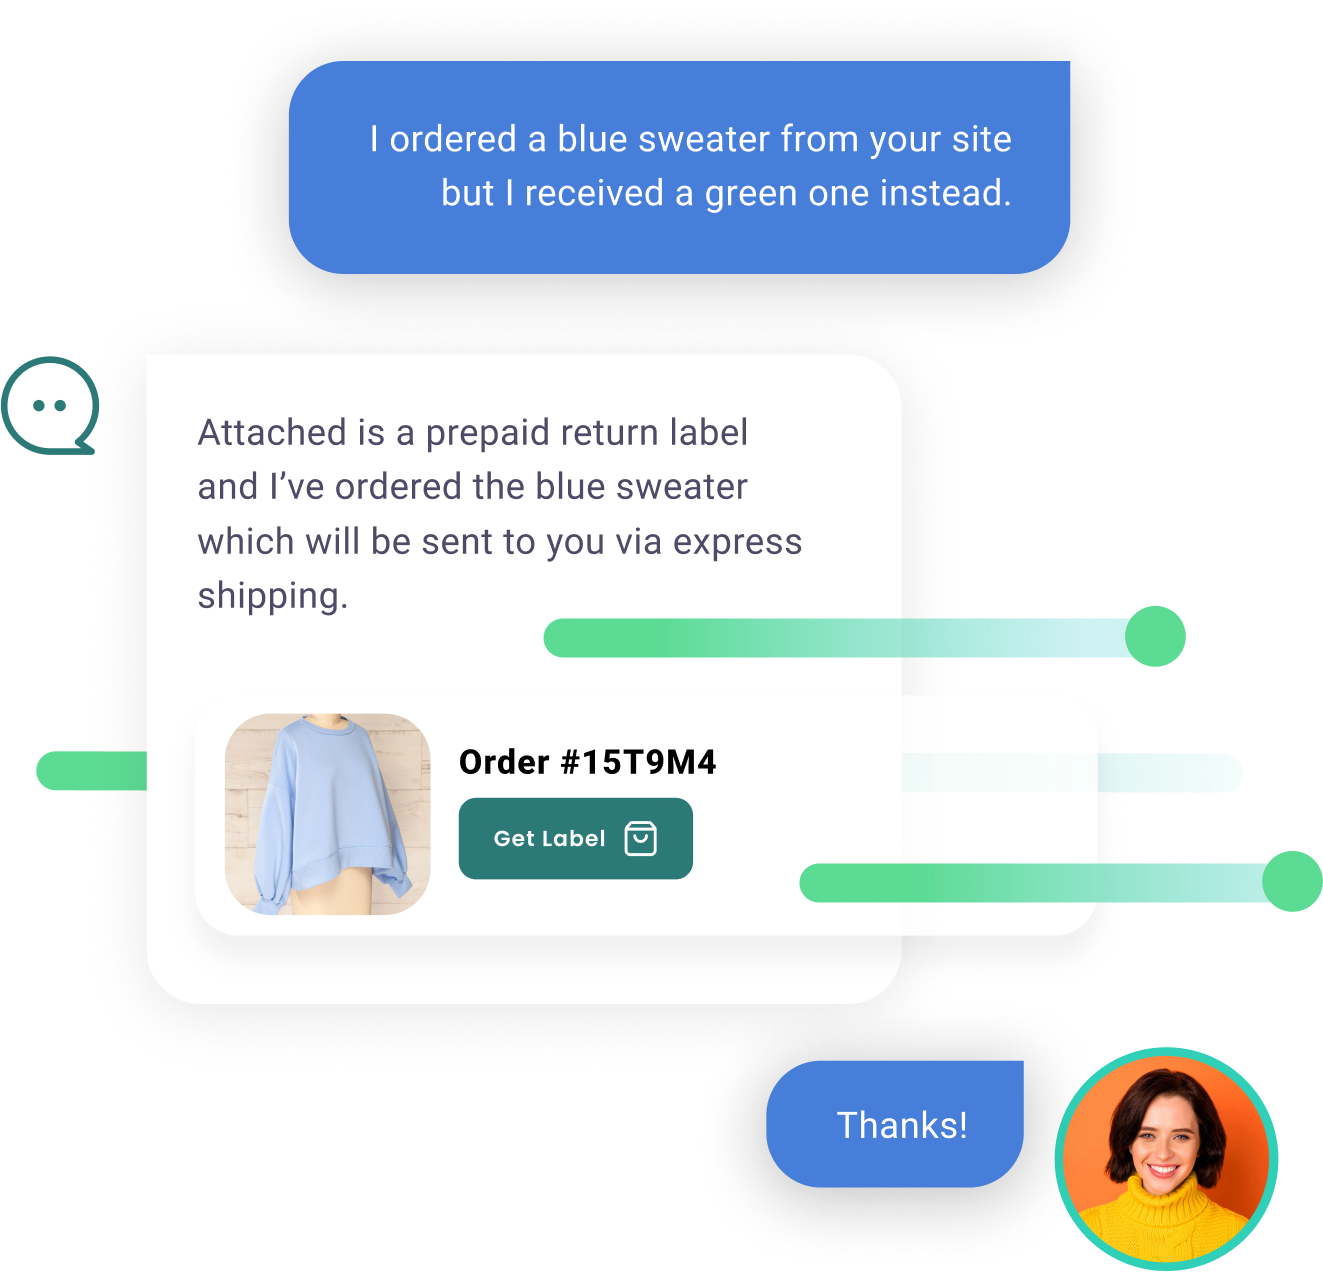 The image is of a customer service chat where a customer states they ordered a blue sweater but received a green one. The representative responds with a solution, offering a prepaid return label and confirming that the correct blue sweater will be sent via express shipping. There's an image of the blue sweater and a "Get Label" button provided, likely for the return. The customer thanks the representative, indicated by a chat bubble with "Thanks!" and an accompanying profile picture of a smiling person wearing a yellow sweater.